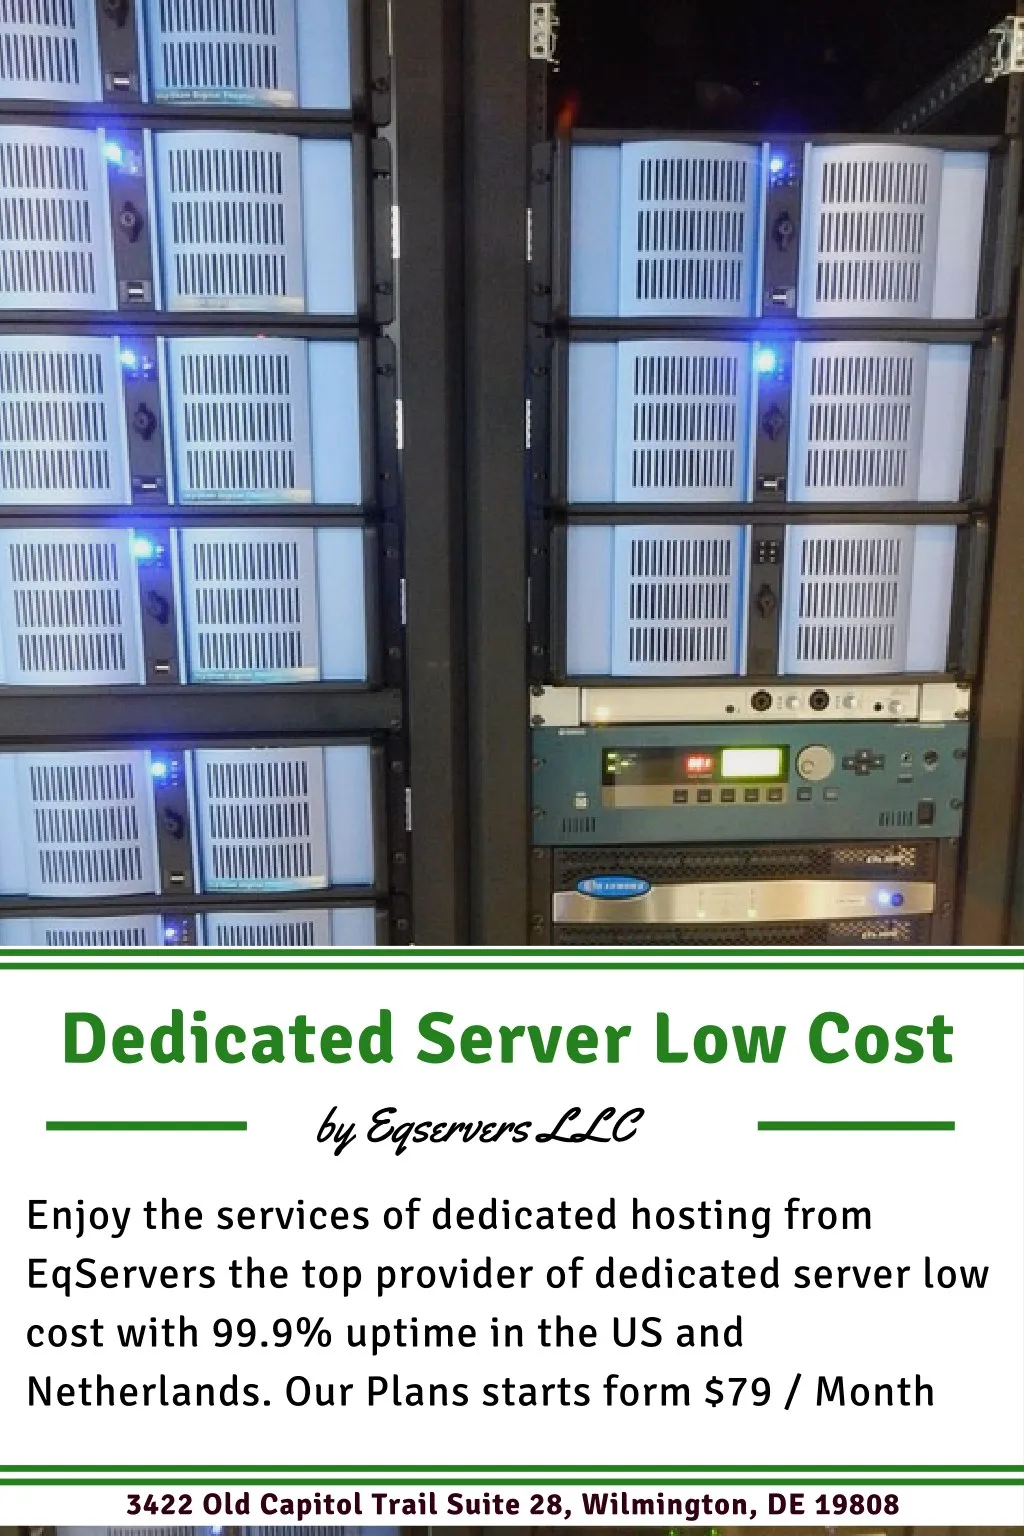 dedicated server low cost by eqservers llc